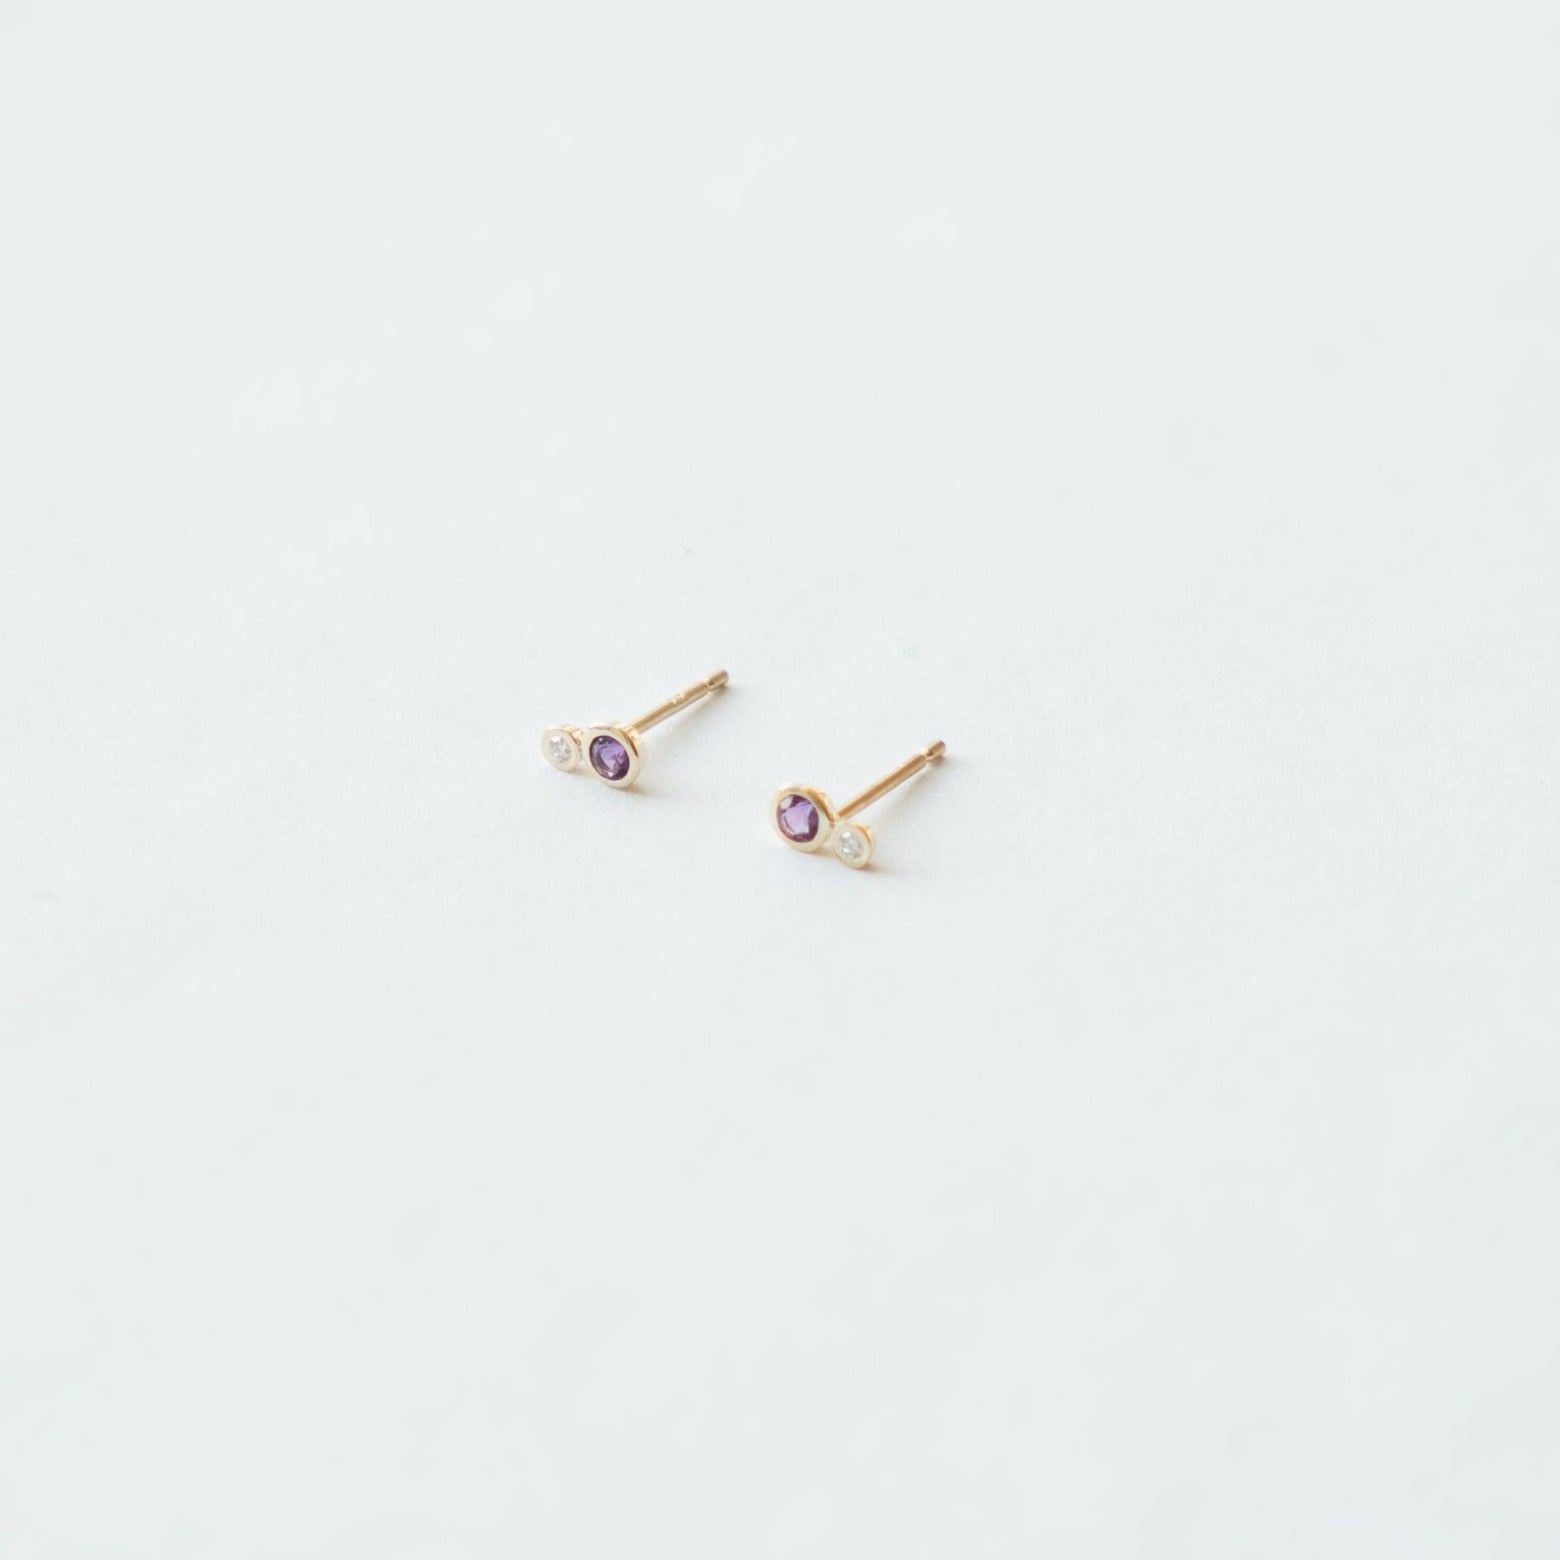 Designer Kiki Stud Earrings in 14k Yellow Gold with Amethyst and White Diamond by SHW fine Jewelry in NYC